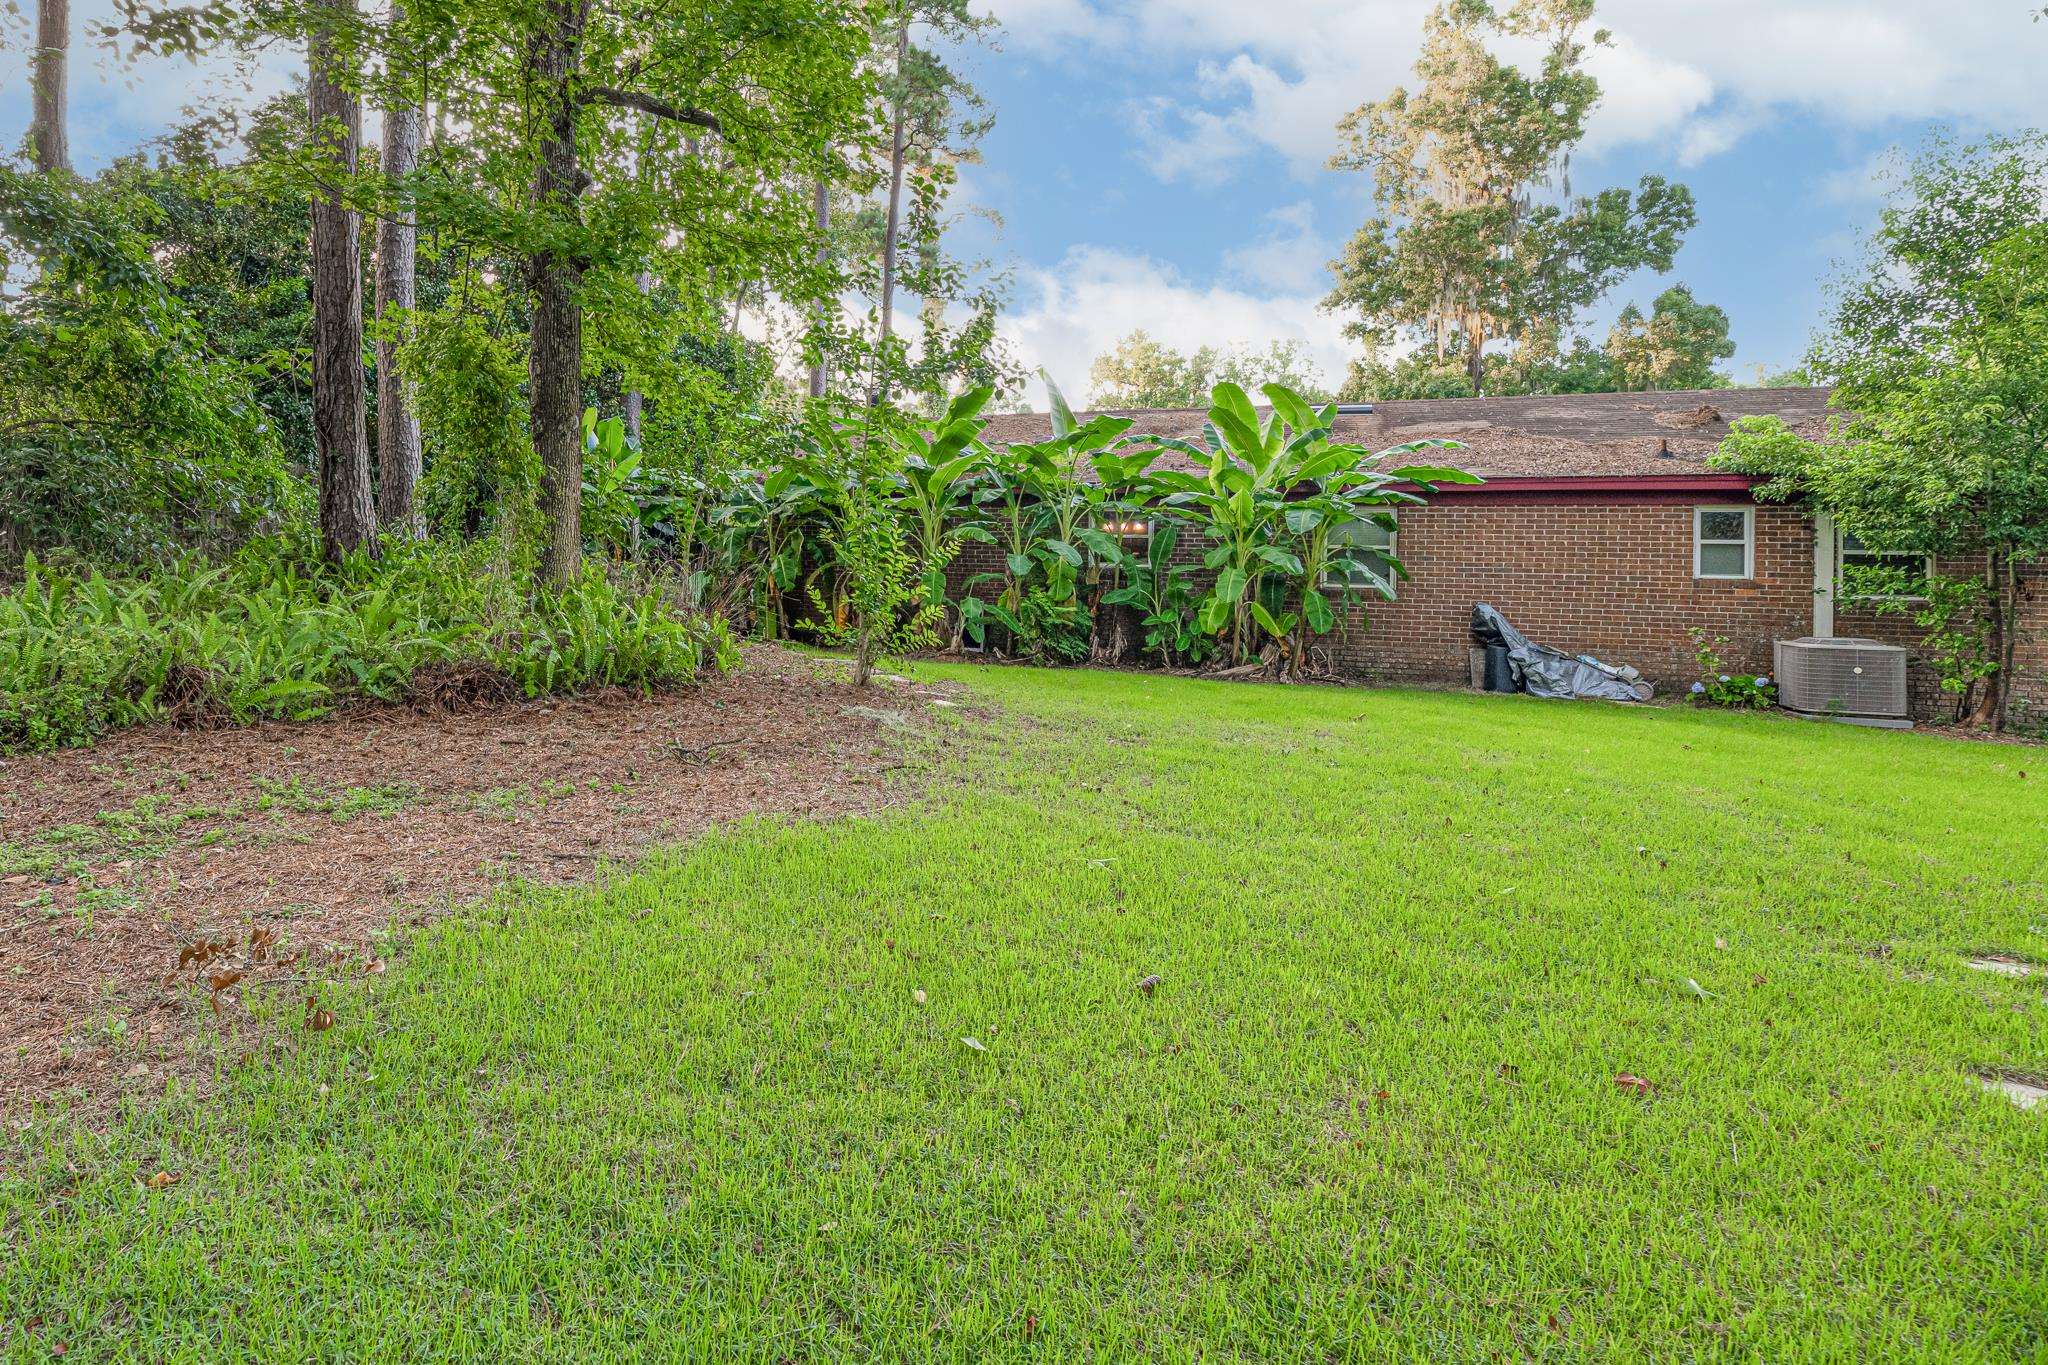 1721 Talpeco Road,TALLAHASSEE,Florida 32303,3 Bedrooms Bedrooms,1 BathroomBathrooms,Detached single family,1721 Talpeco Road,365370